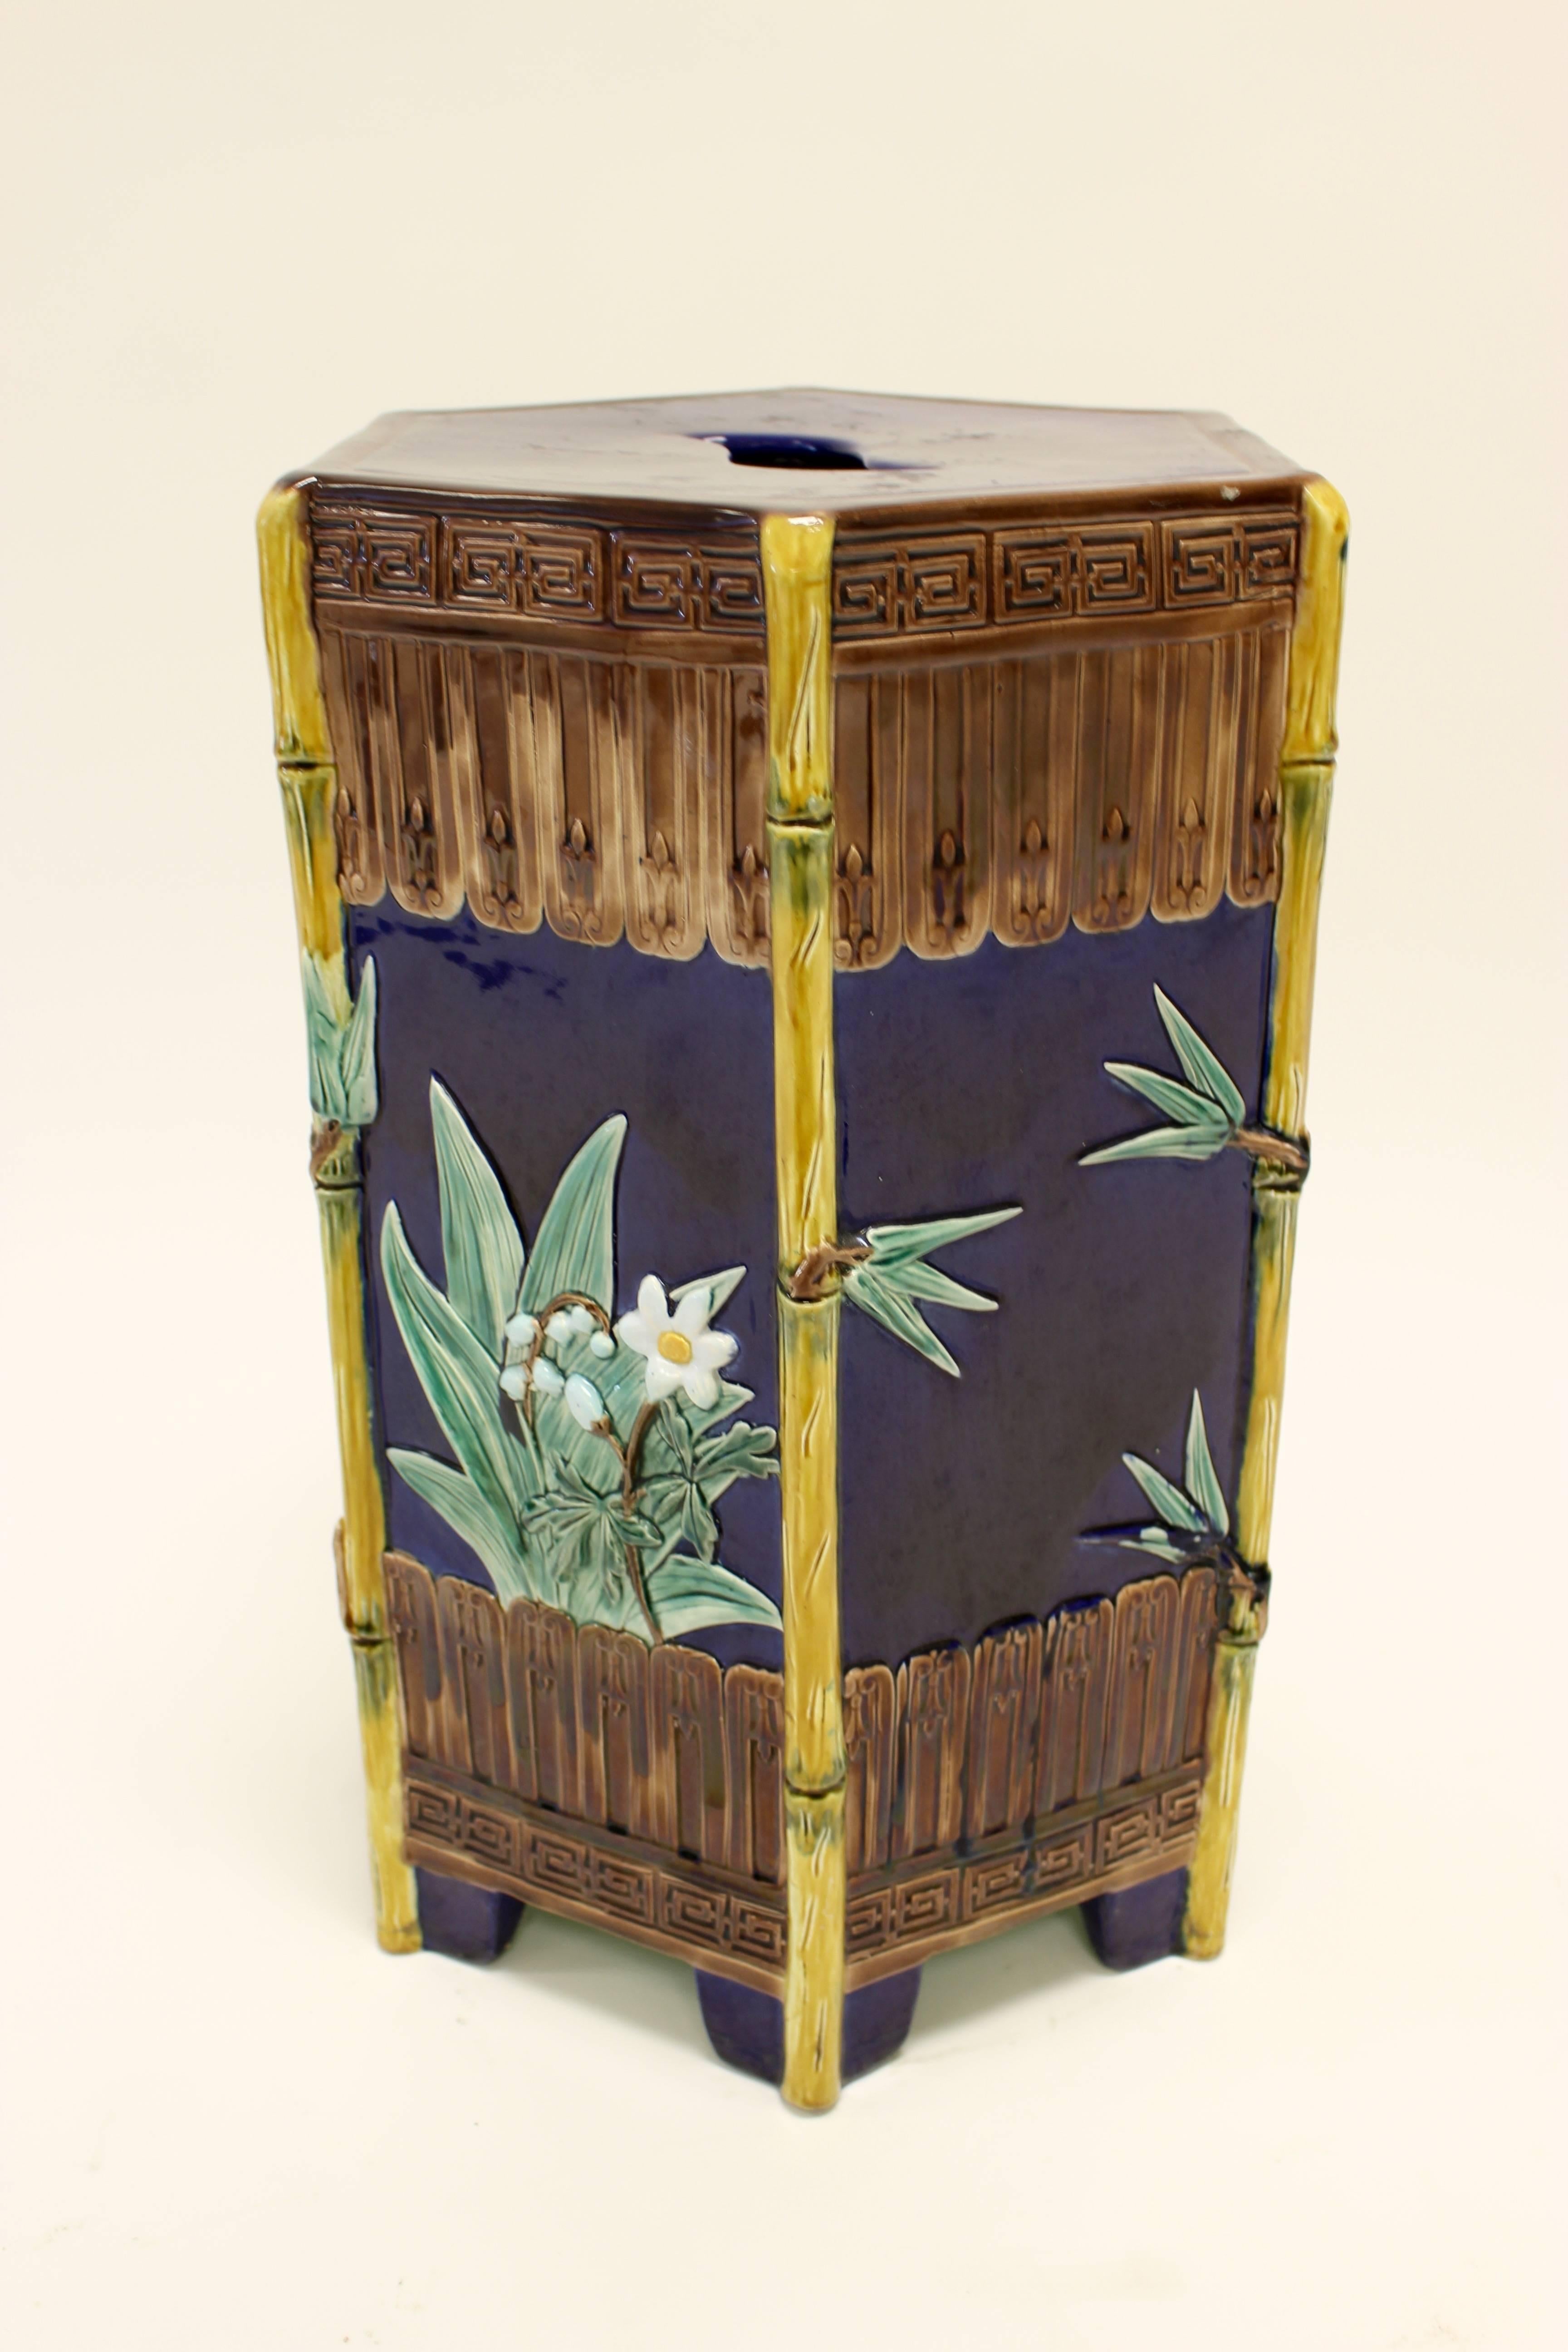 A porcelain garden seat of hexagonal form decorated in relief with lily of the valley flowers and bamboo leaves on a cobalt-blue ground. Molded bamboo-shaped mounts ending in bracket feet adorn the corners of the piece, nicely enhancing its